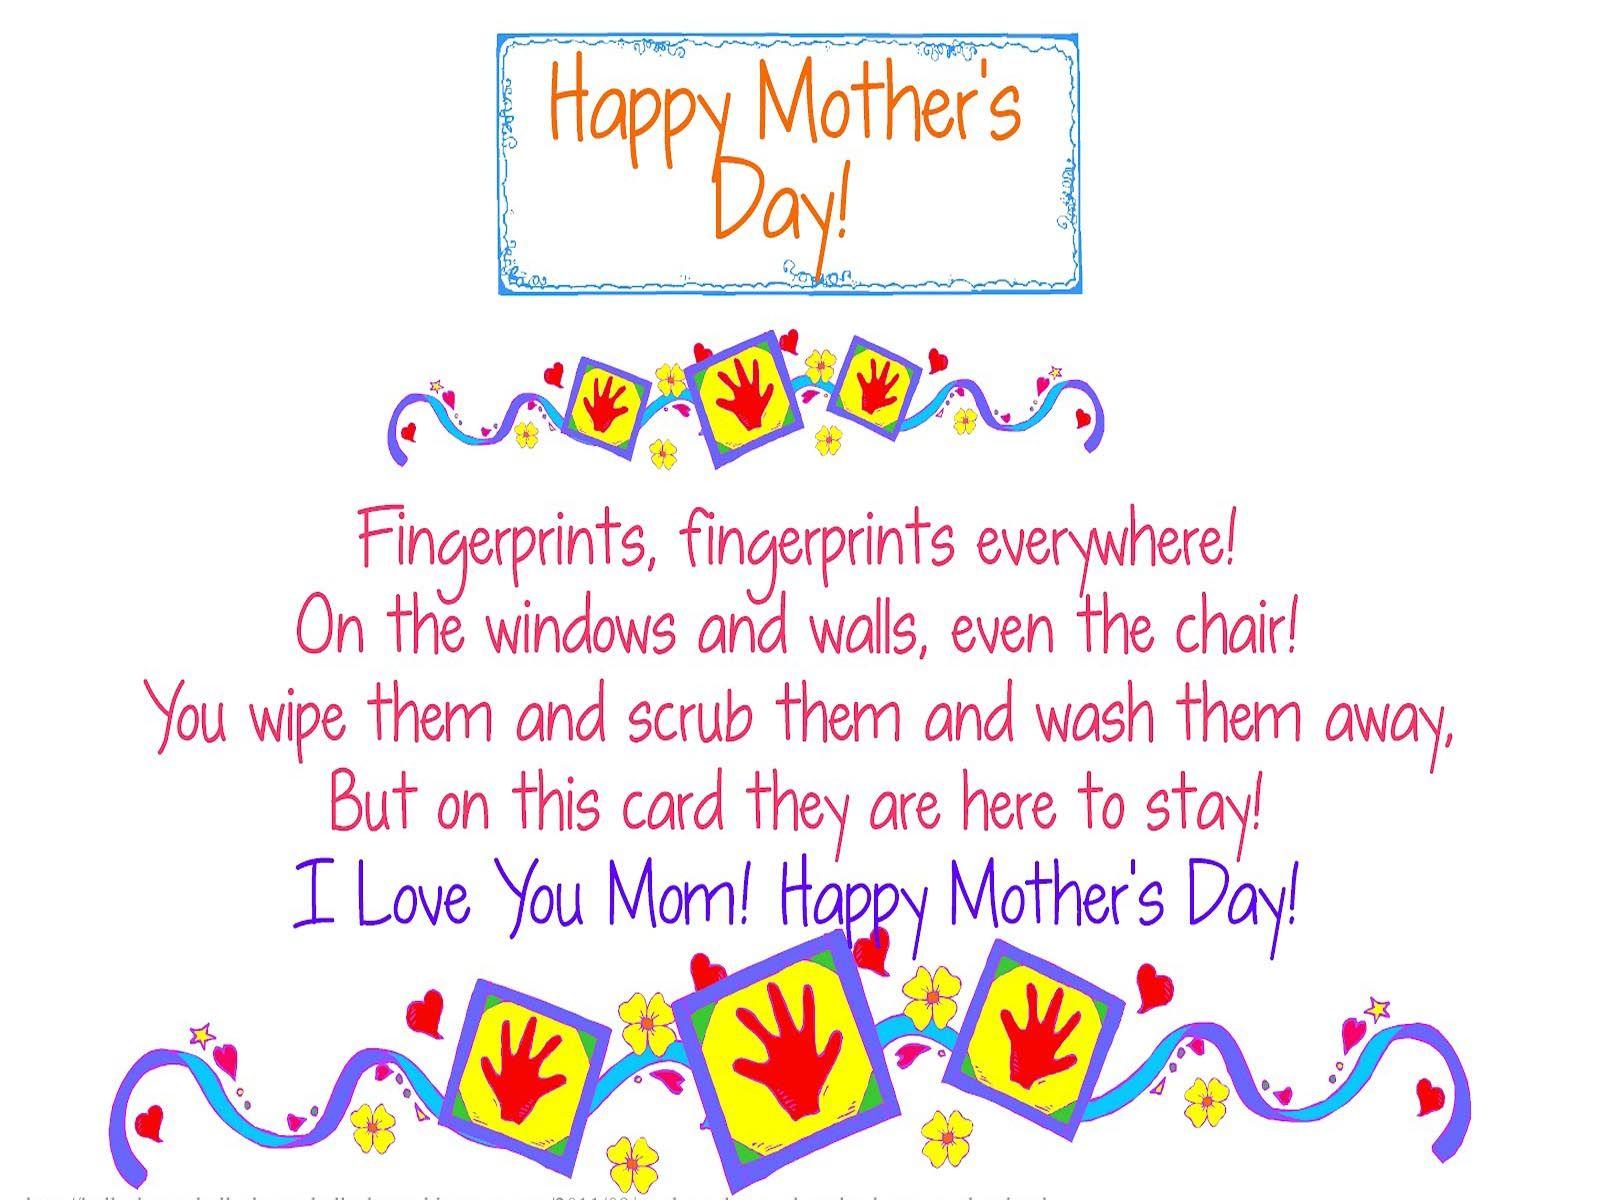 Mother's Day Wallpaper Poems 2018 - Mother's Day